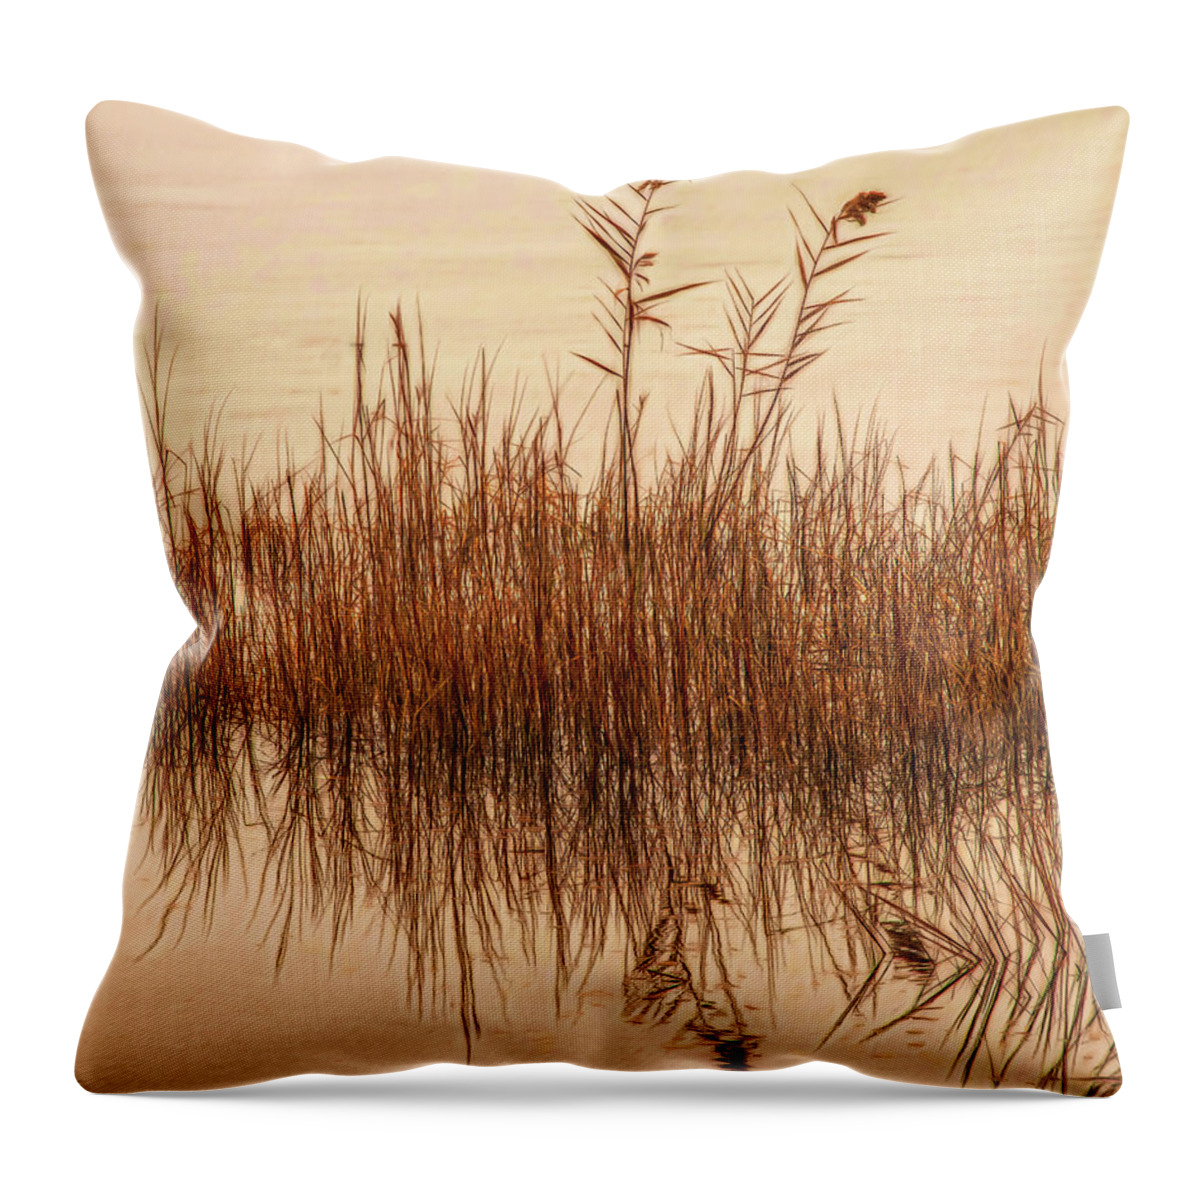 Swamp Throw Pillow featuring the photograph Peaceful Morning At The Estuary by Gary Slawsky